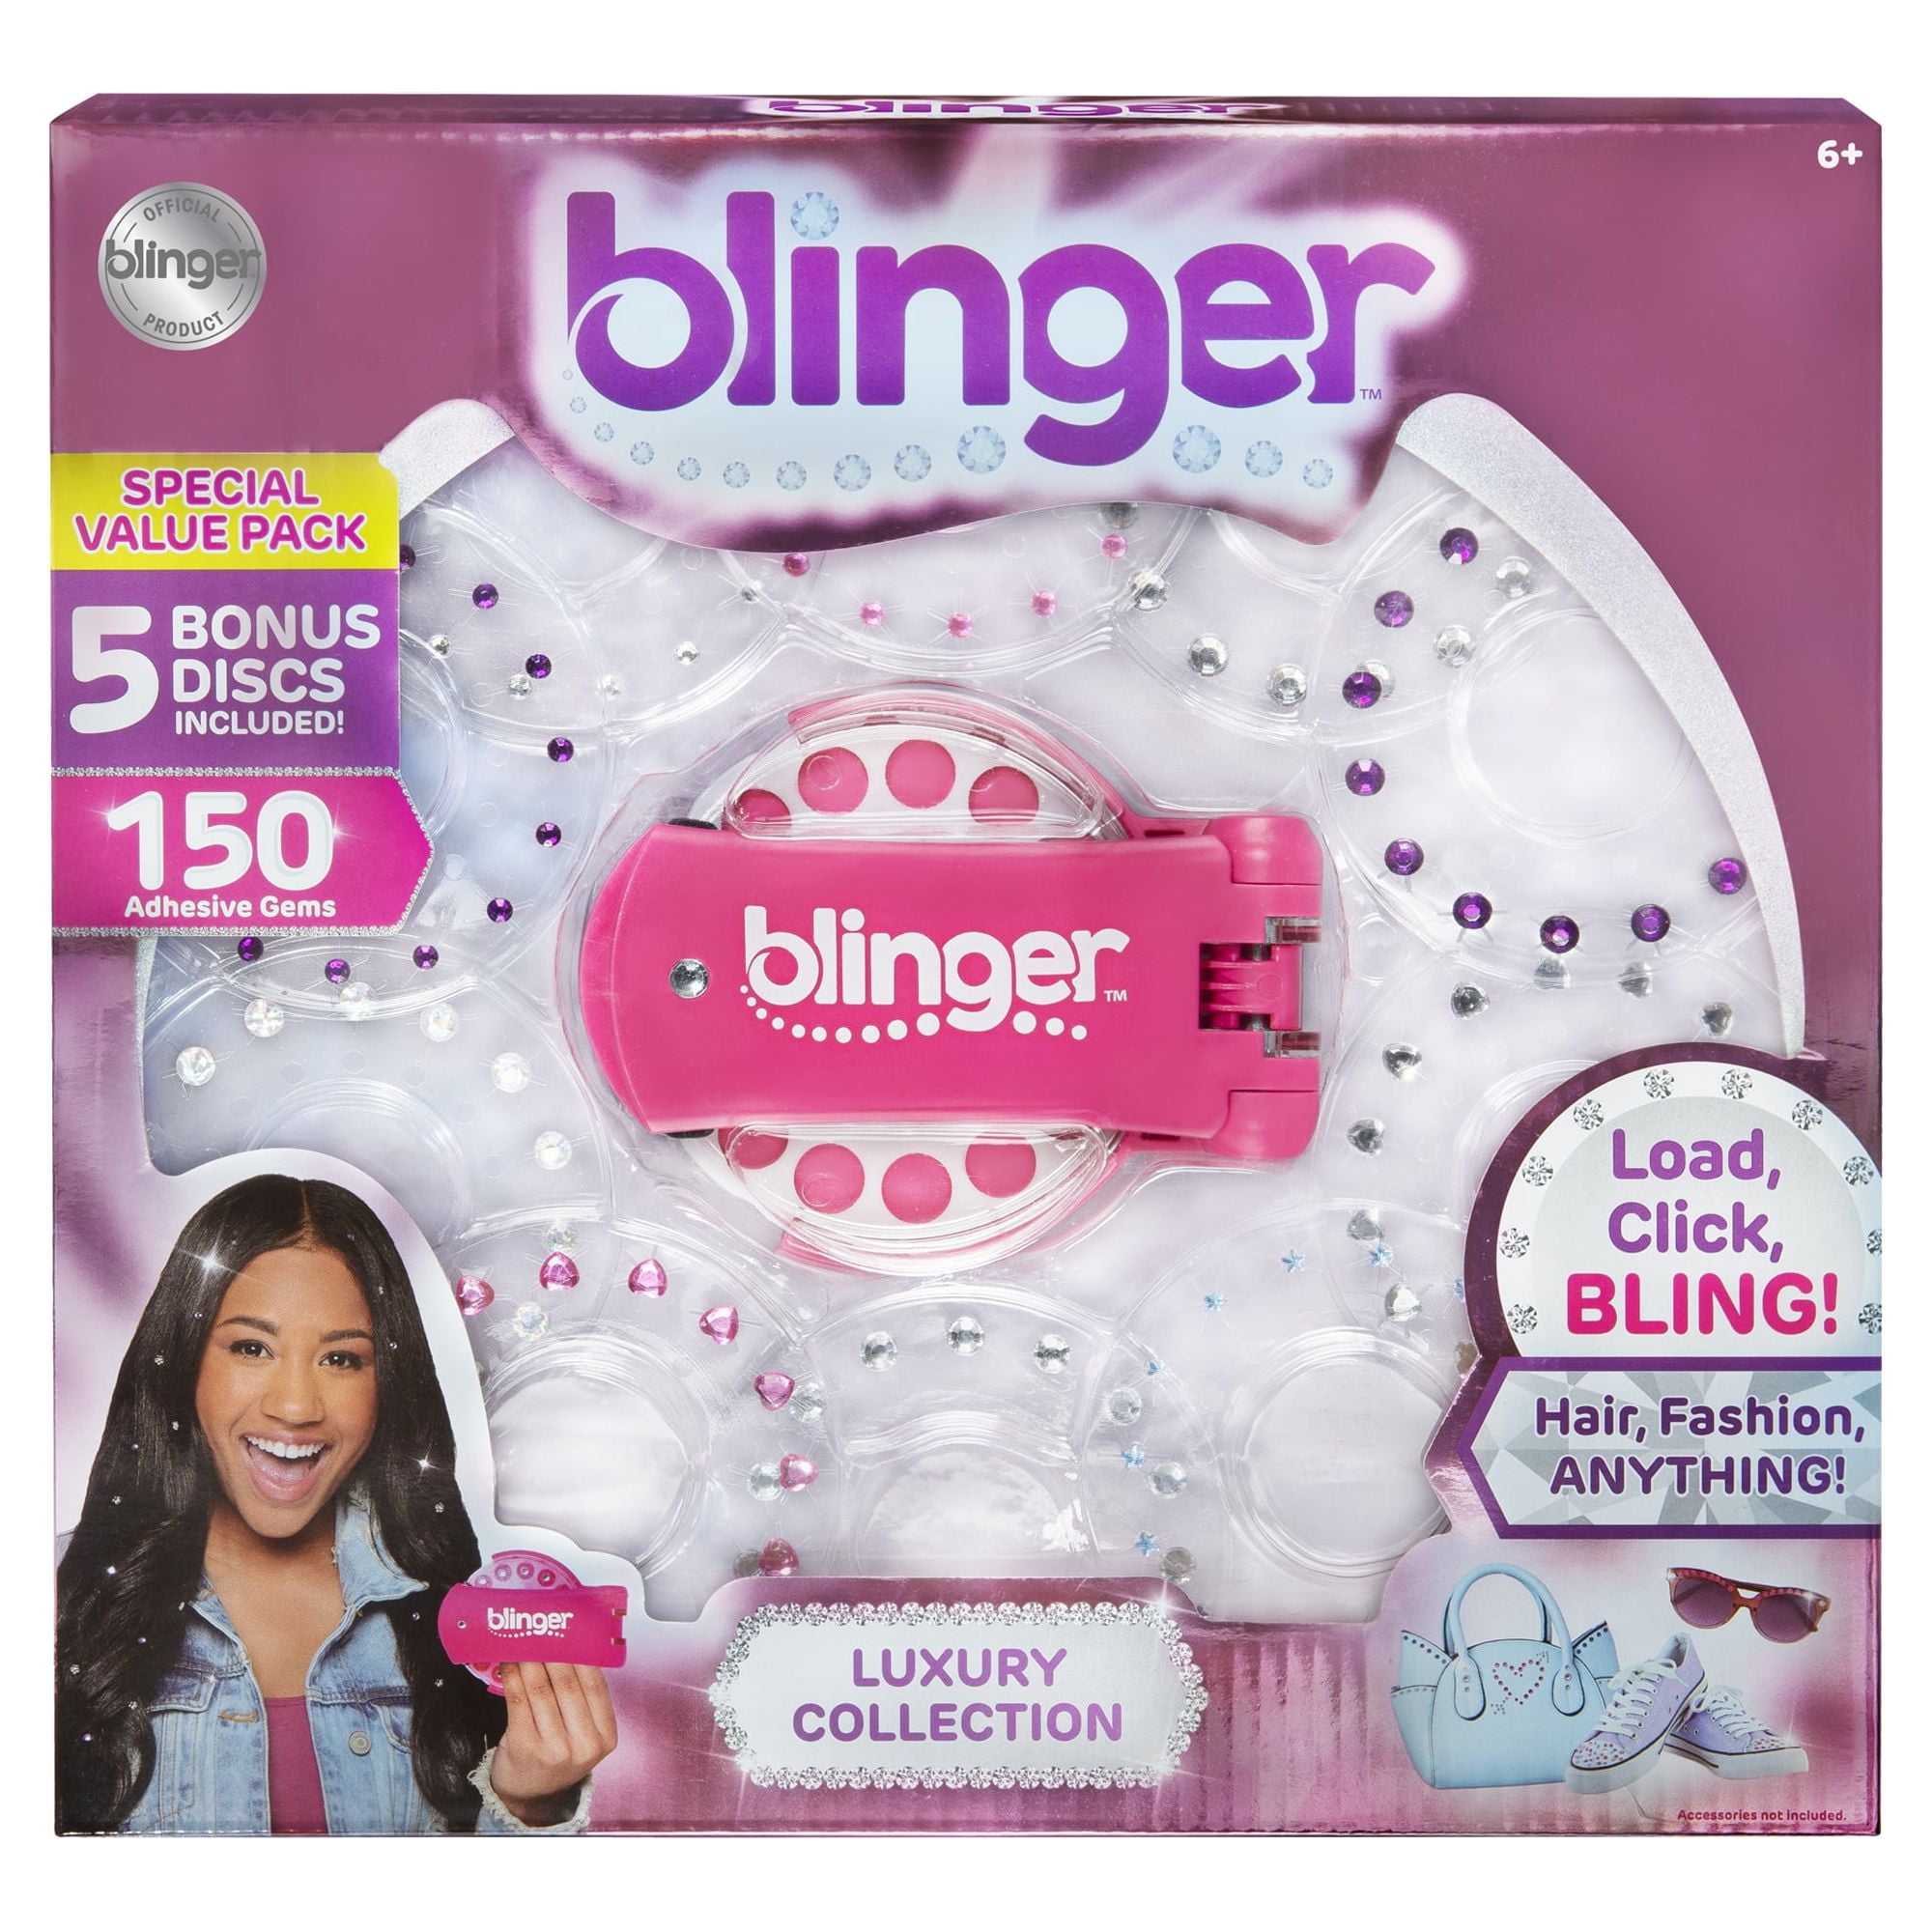 Blinger Radiance Collection Blinger Wicked Cool Toys - ToyWiz